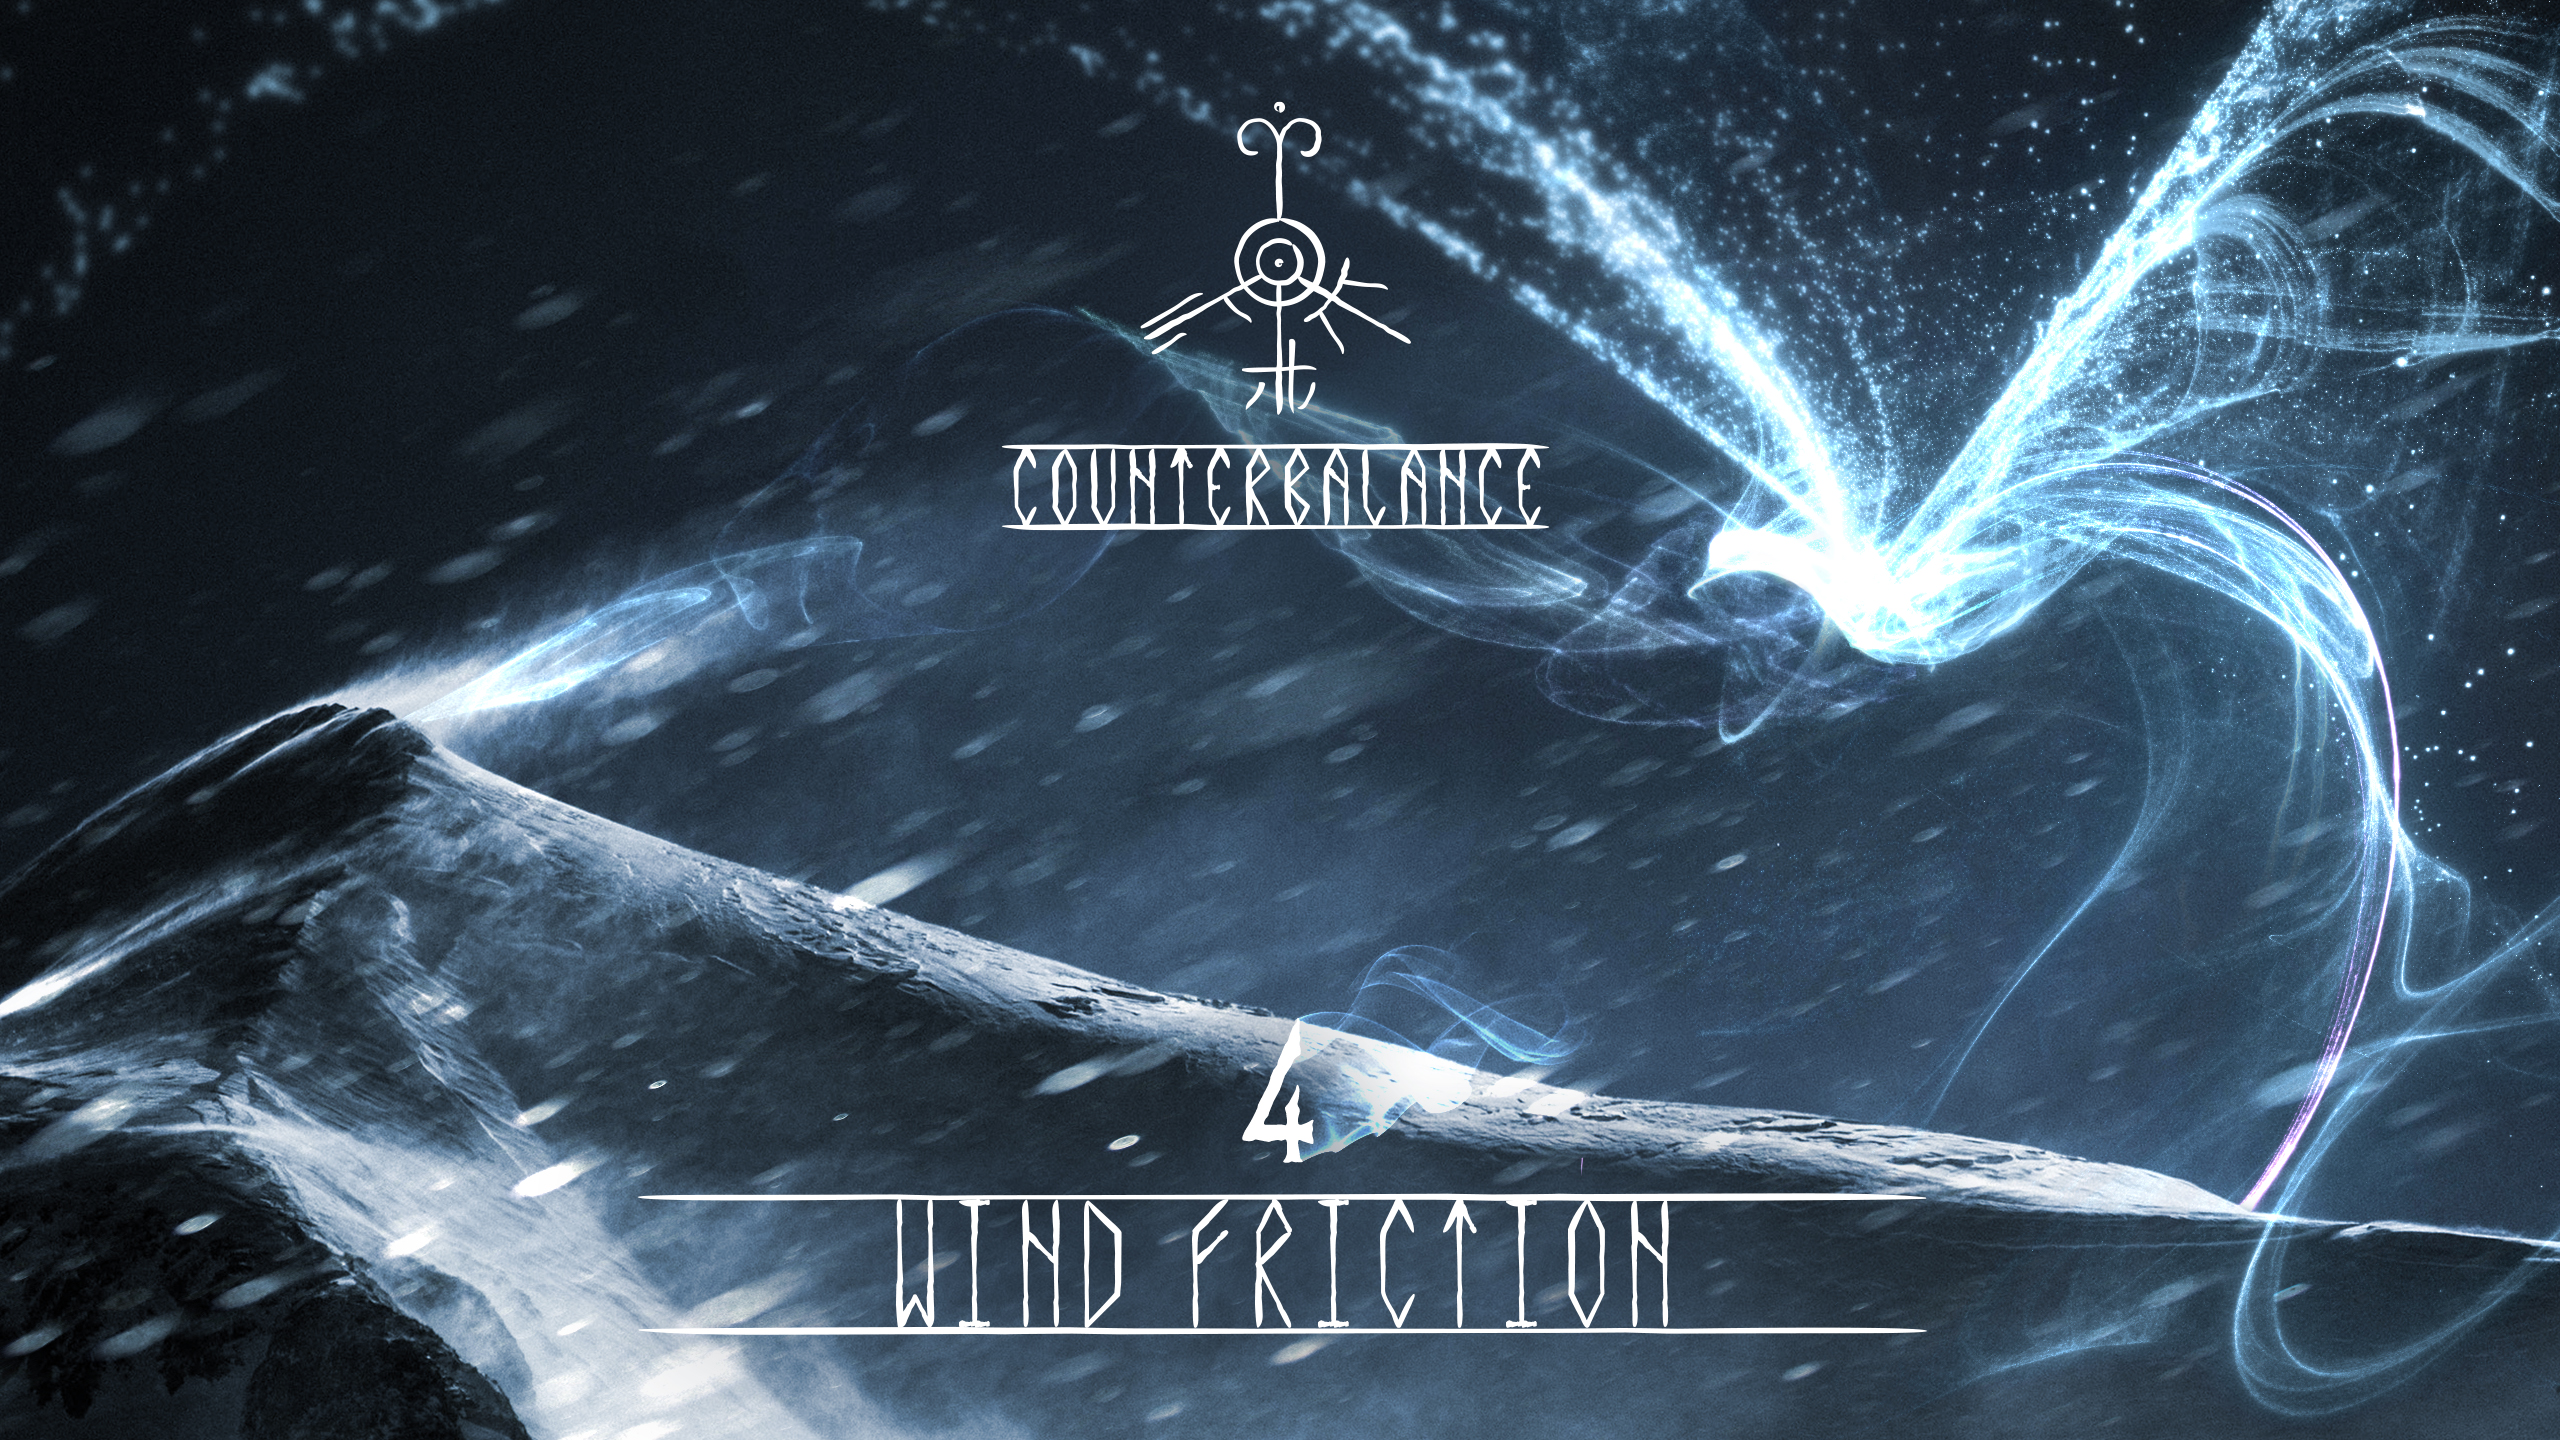 Counterbalance Cover Art Podcast Episode 04 Artwork Wind Friction